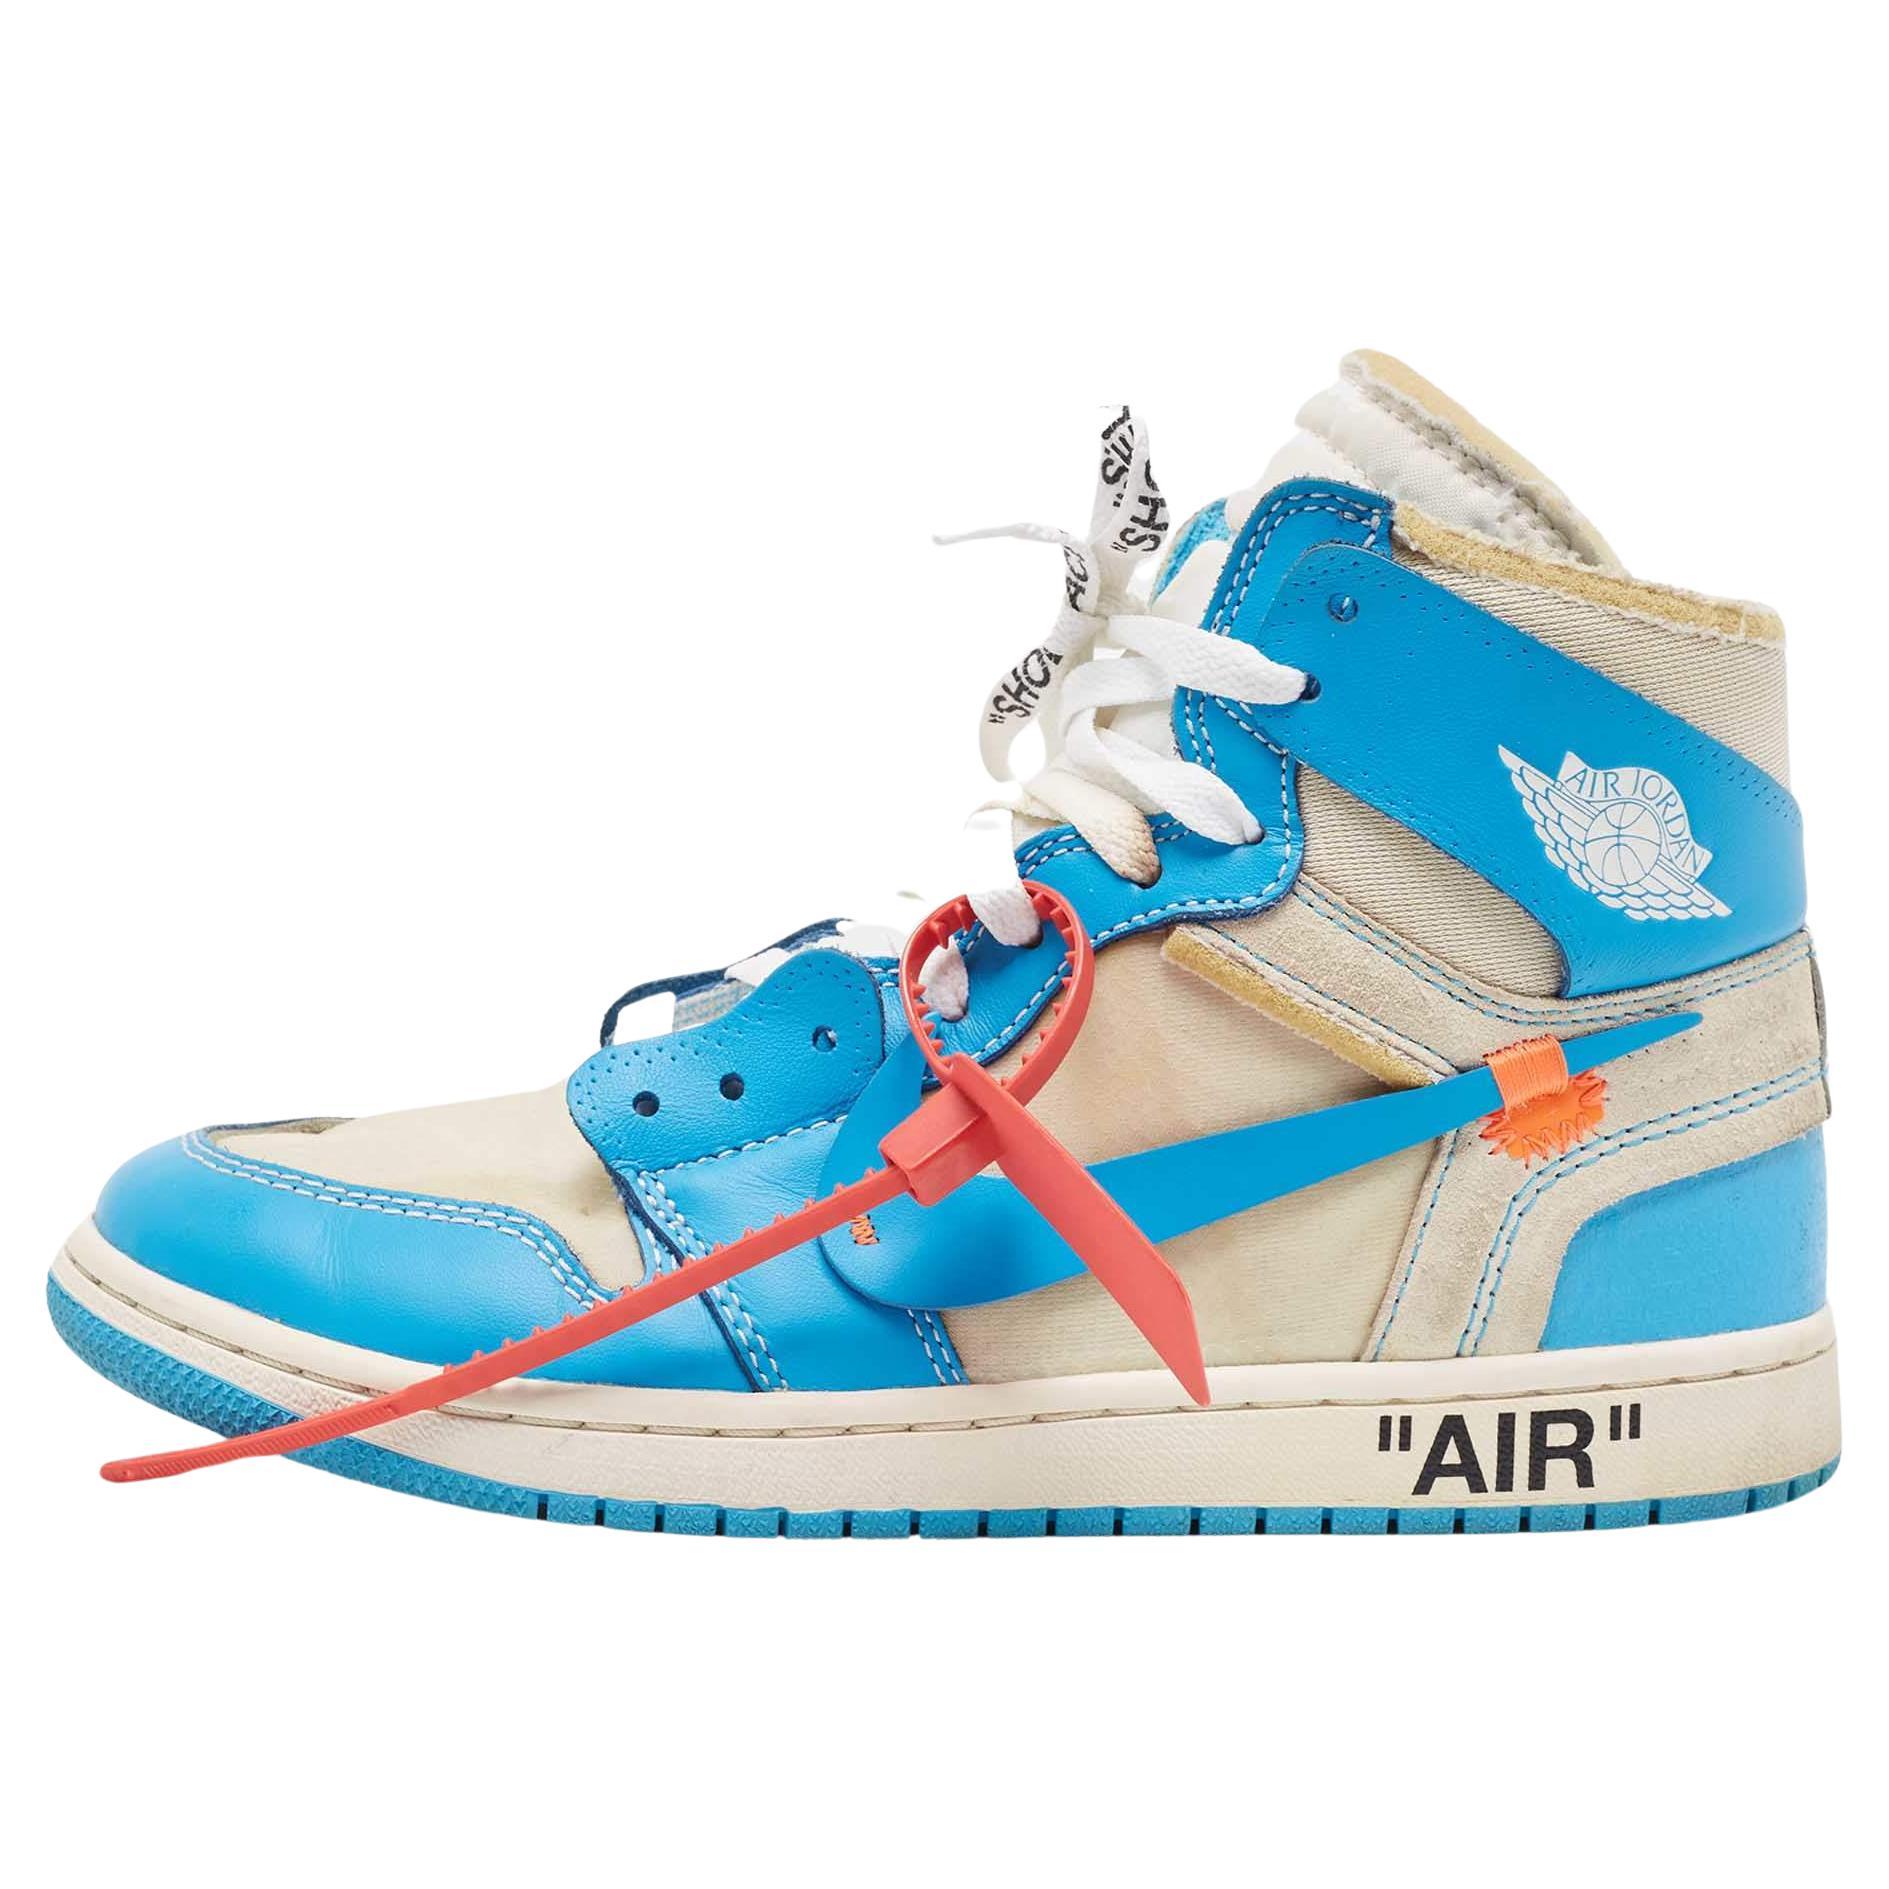 Off-White x Nike Blue/Grey Leather and Mesh Jordan 1 Retro High Sneakers Size 40